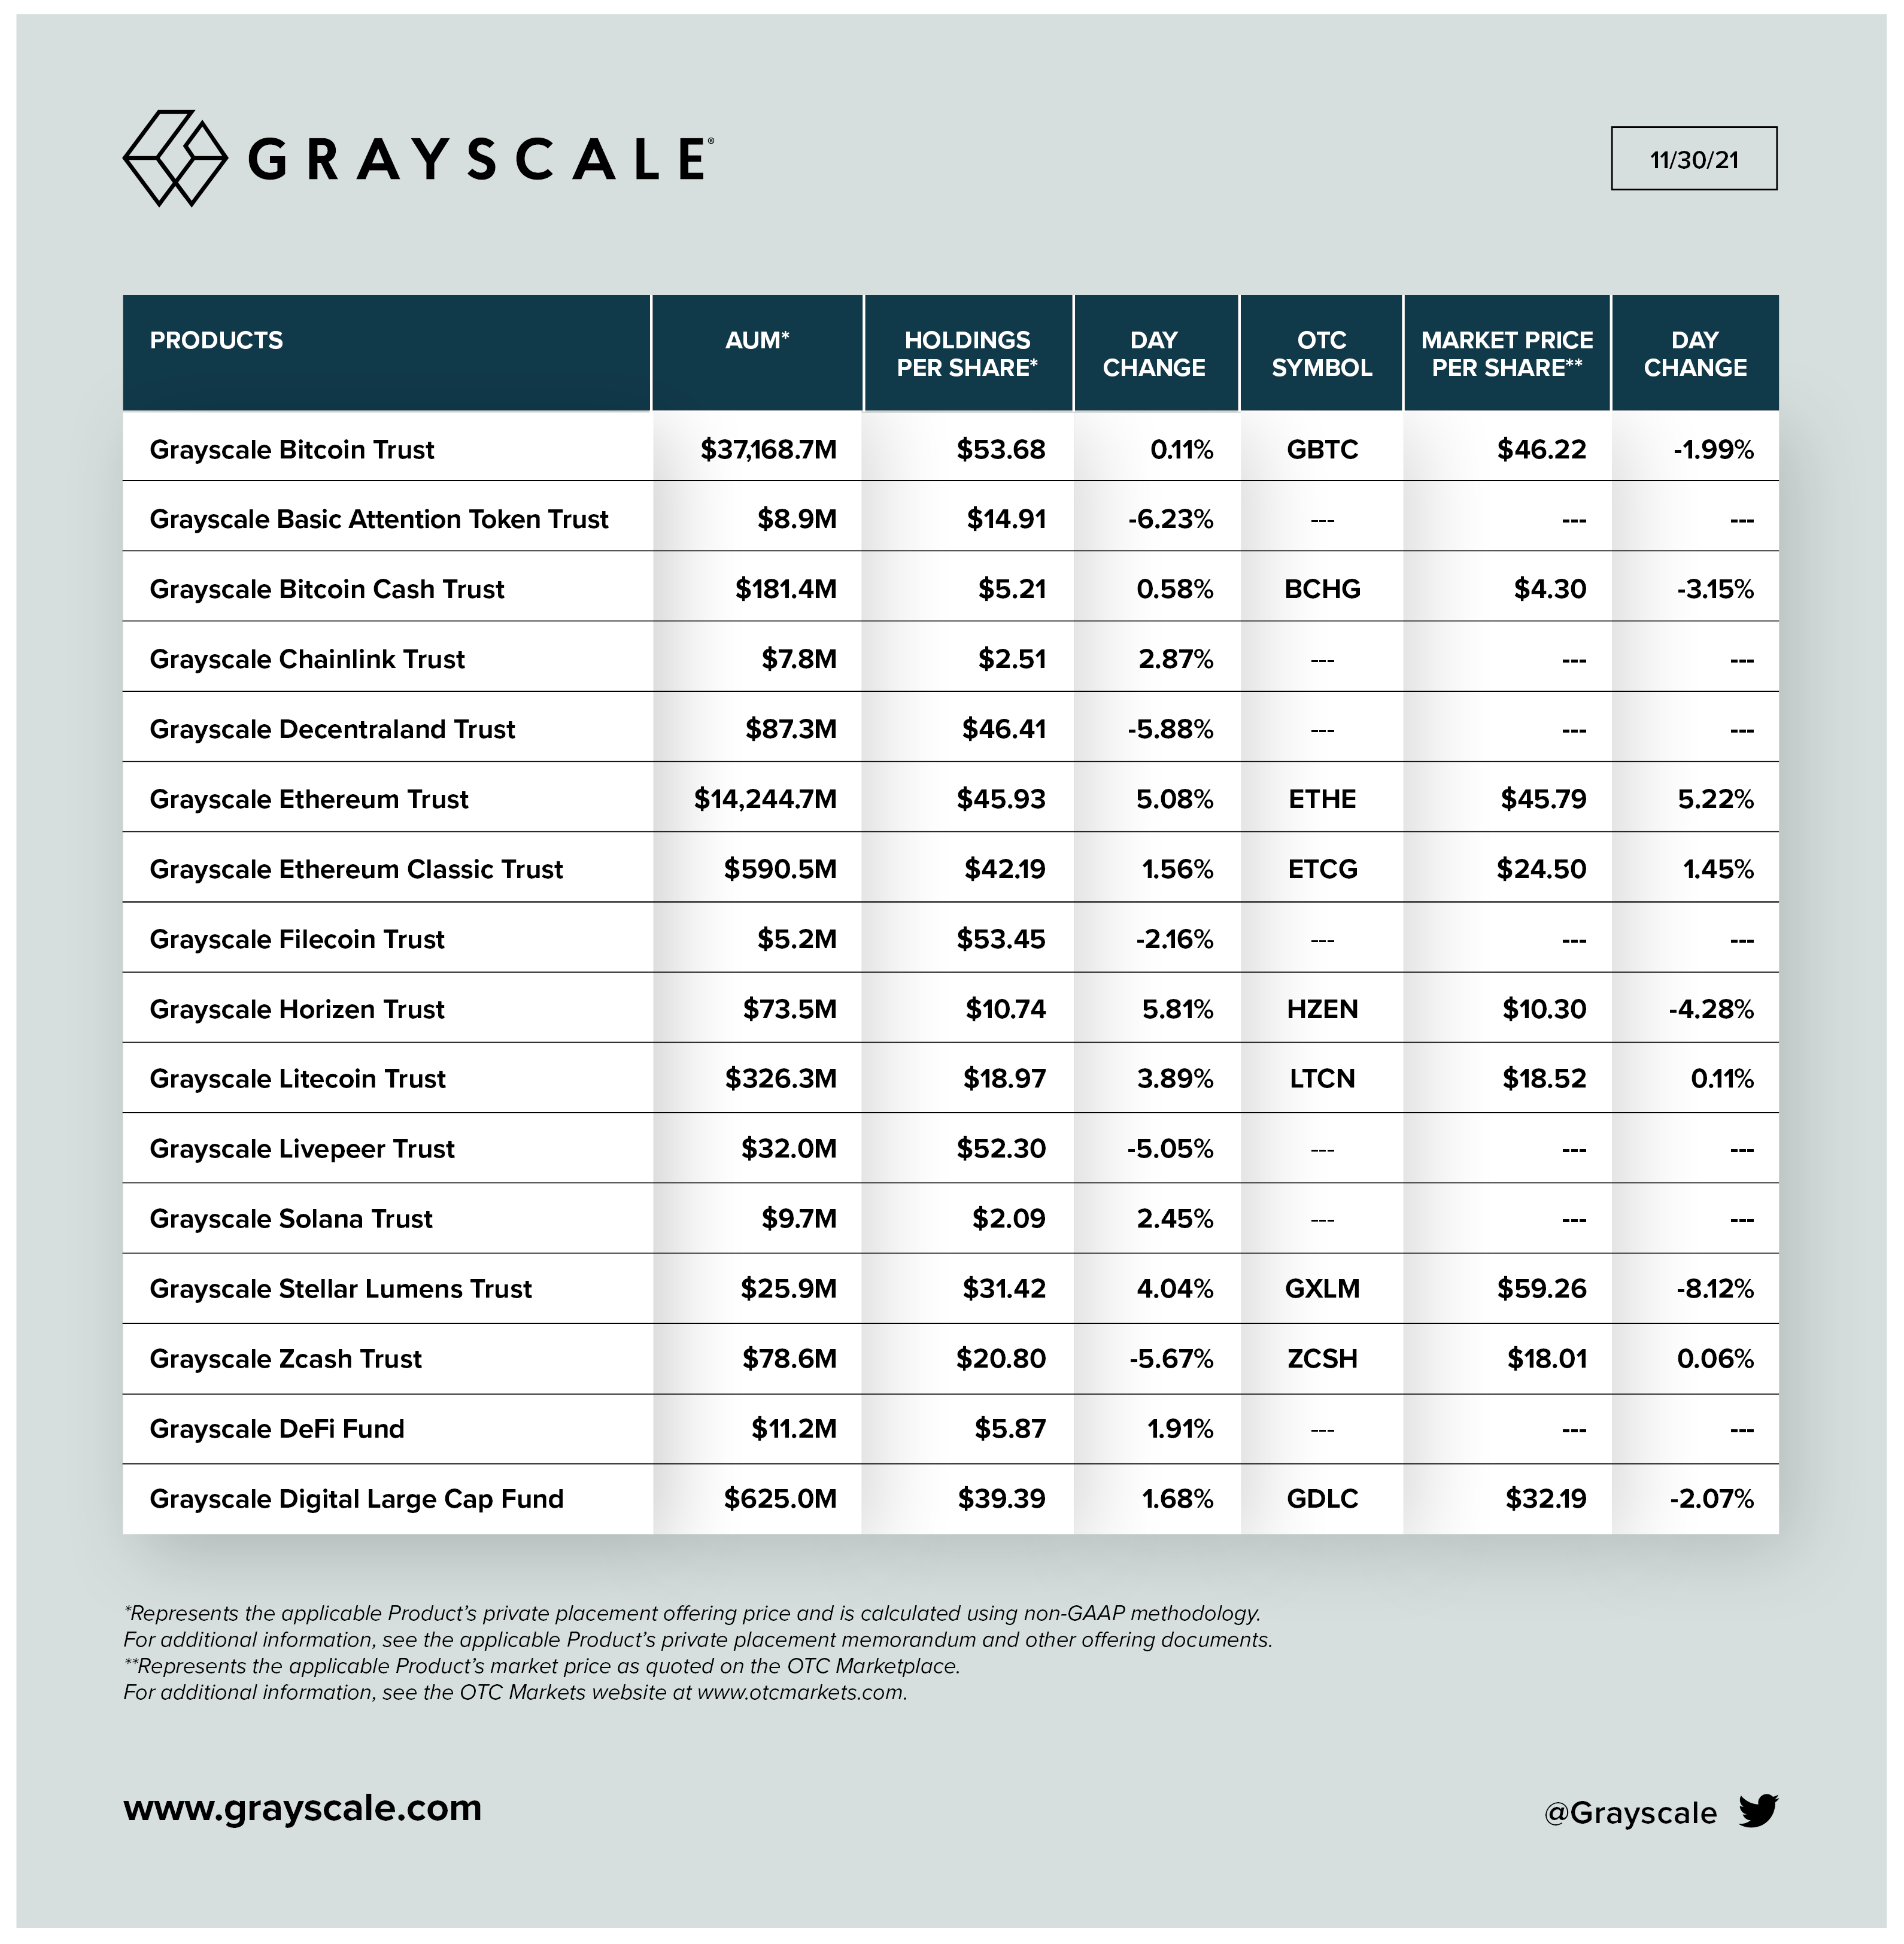 Greyscale Investment